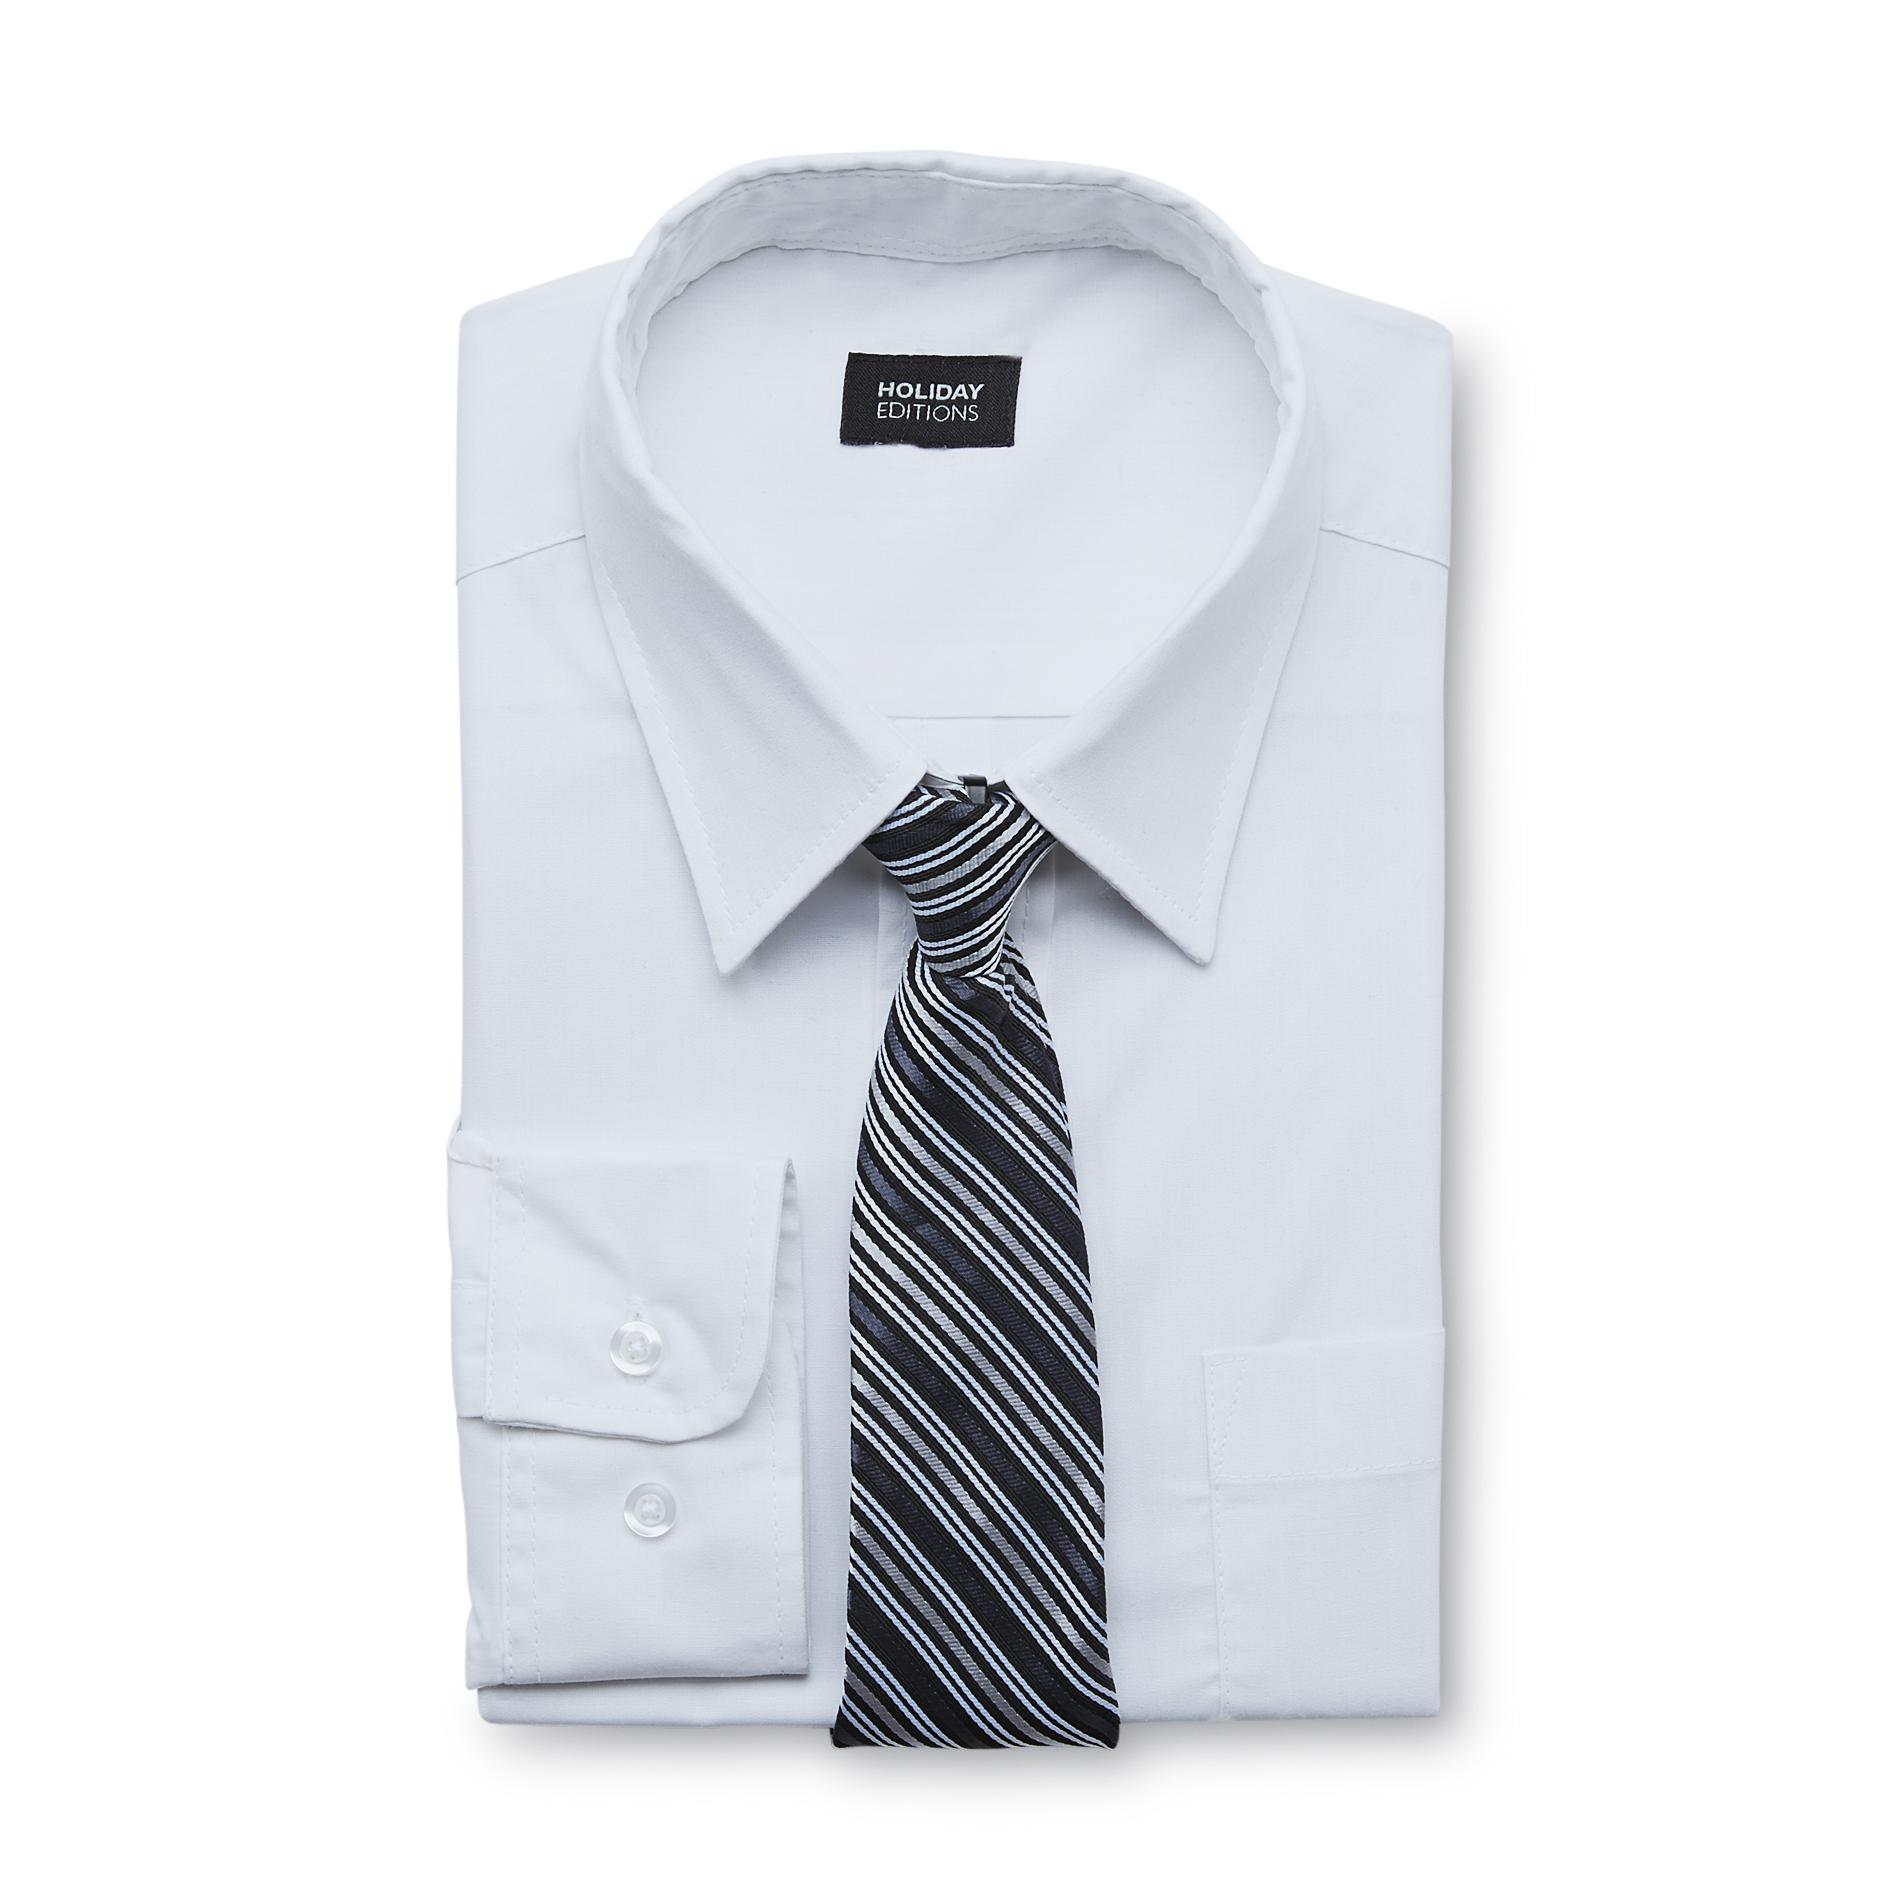 Holiday Editions Boy's Dress Shirt & Clip-On Necktie - Striped